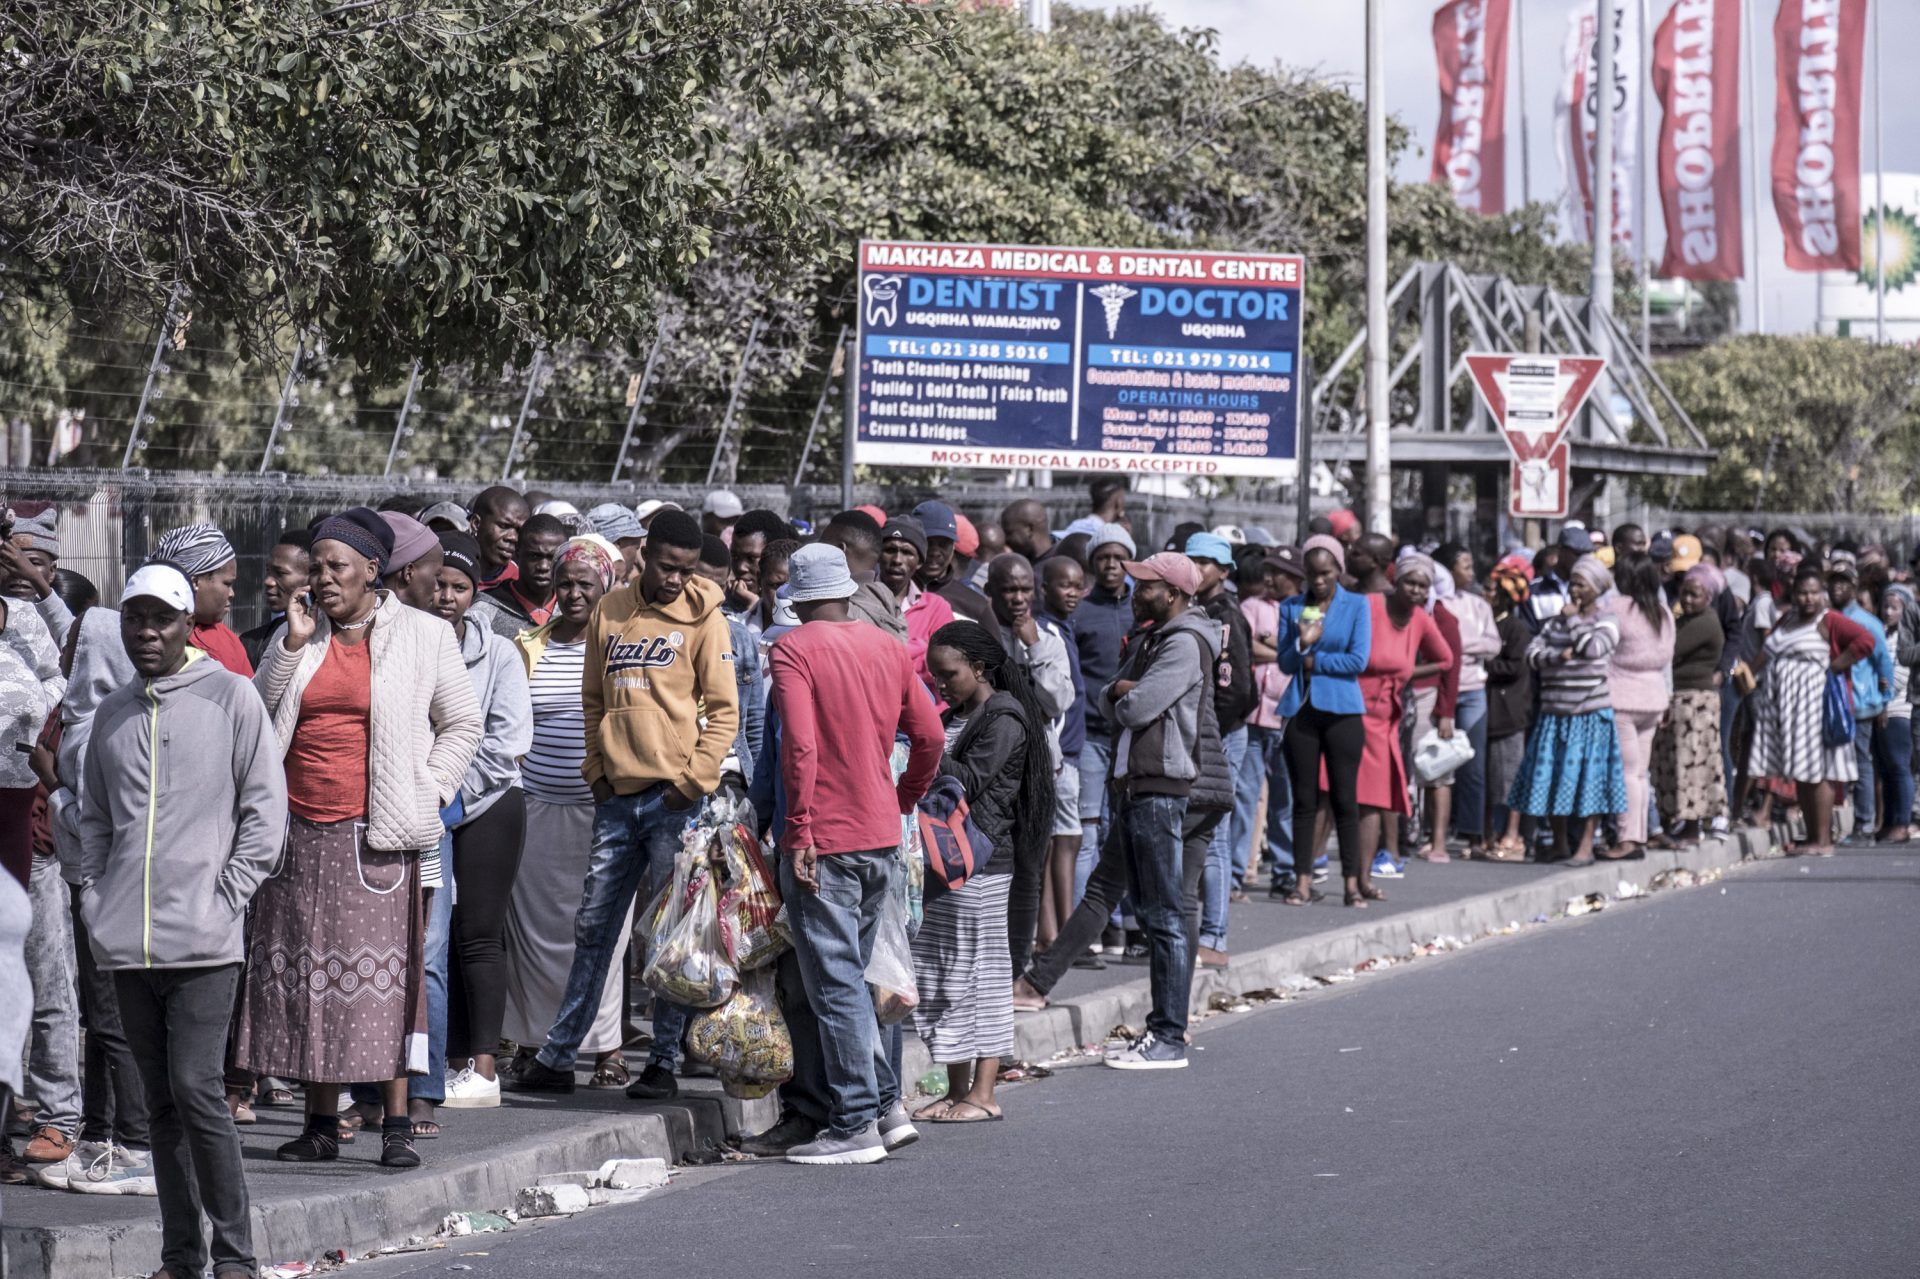 Shoppers line up for food outside a supermarket in the township of Khayelitsha in Cape Town during South Africa's lockdown.